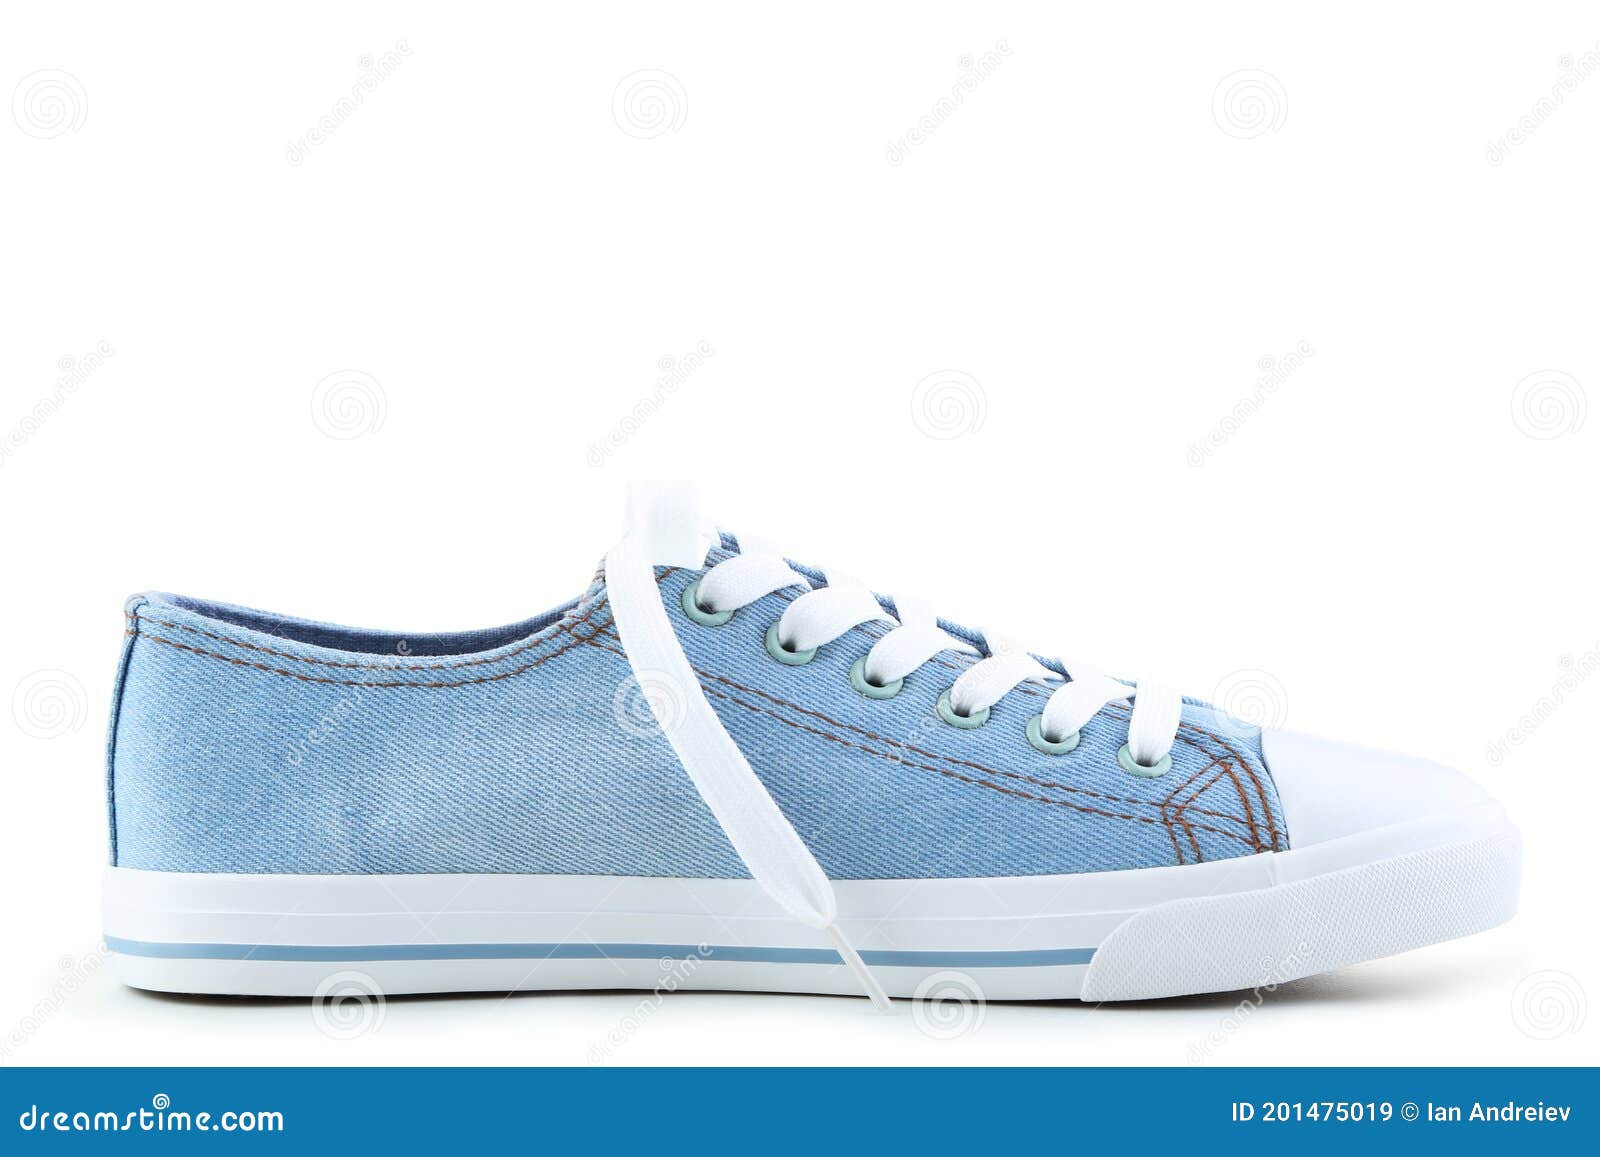 Blue sneaker stock image. Image of athletic, exercise - 201475019